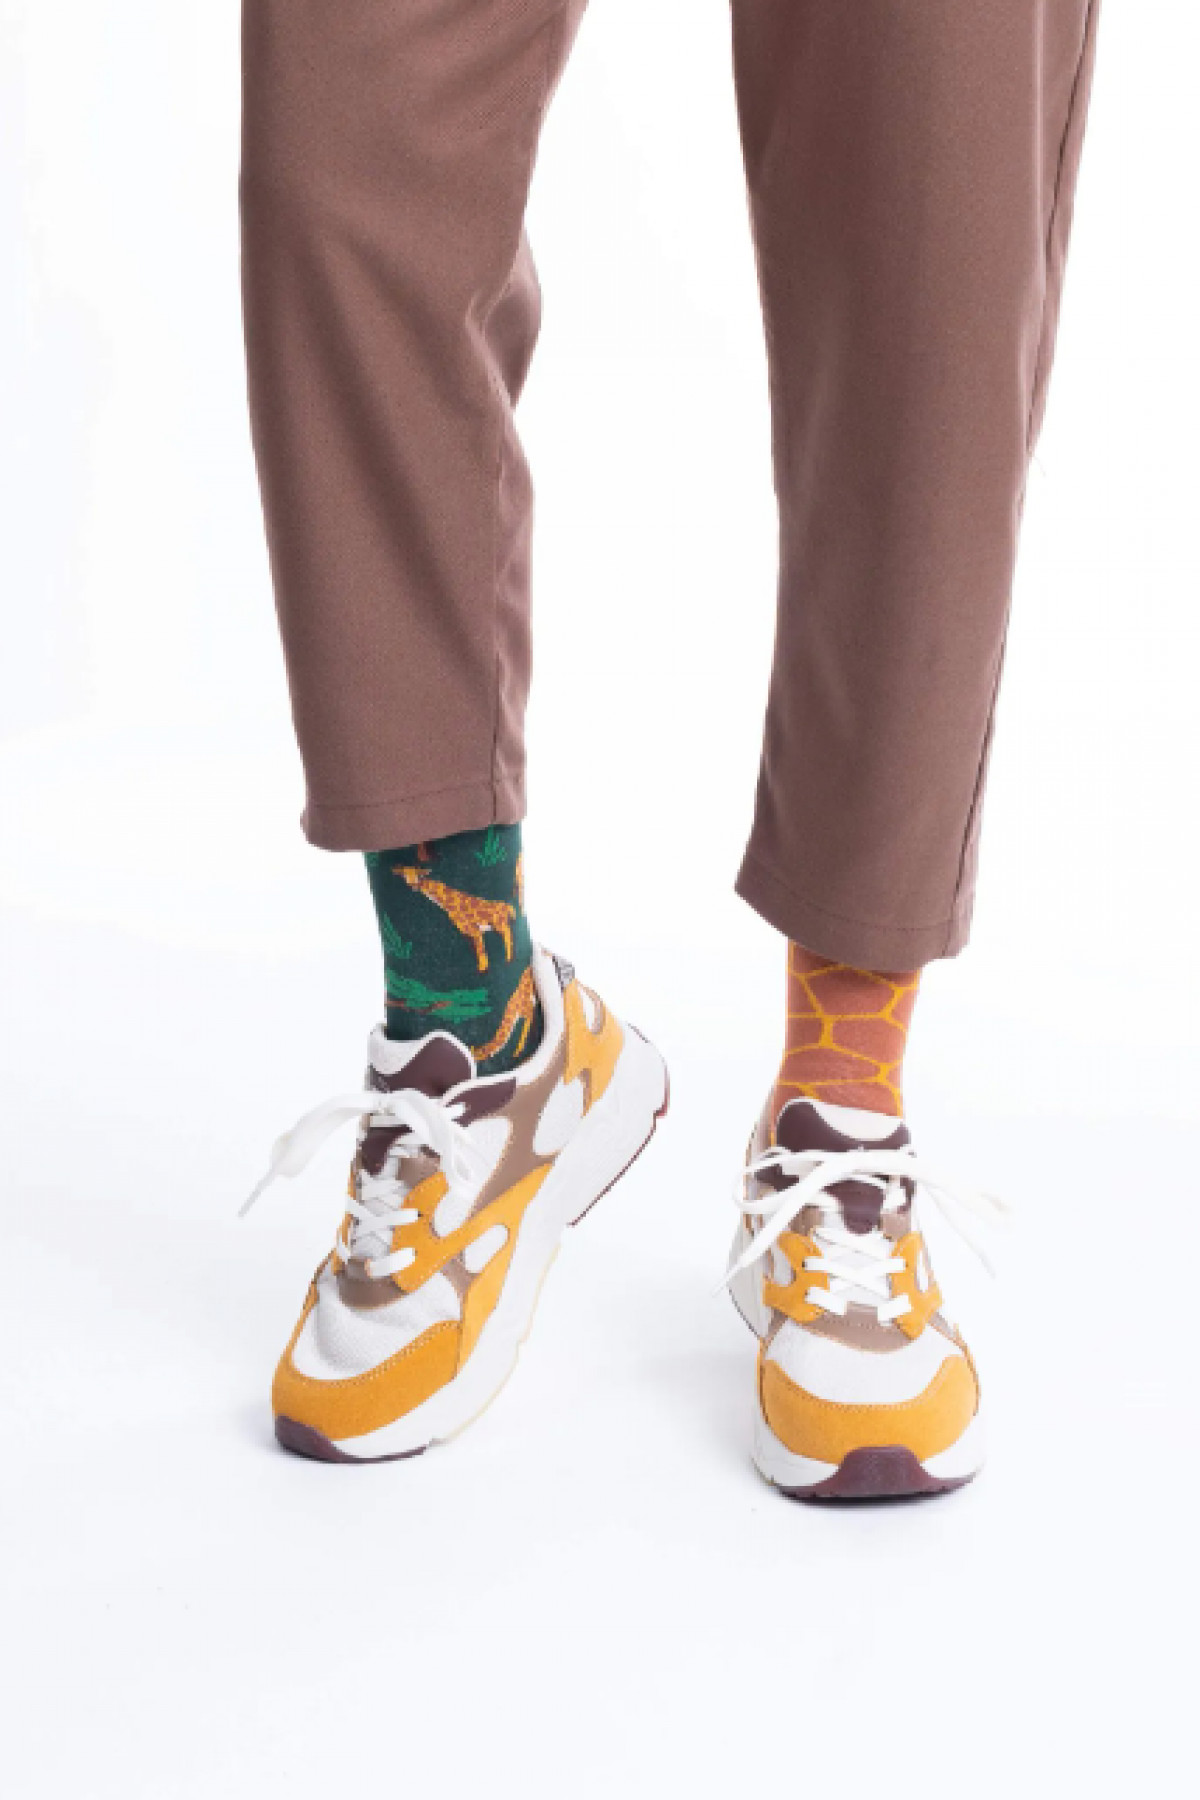 Chaussettes Many Mornings - The Giraffe - Boutique Toup'tibou - photo 7